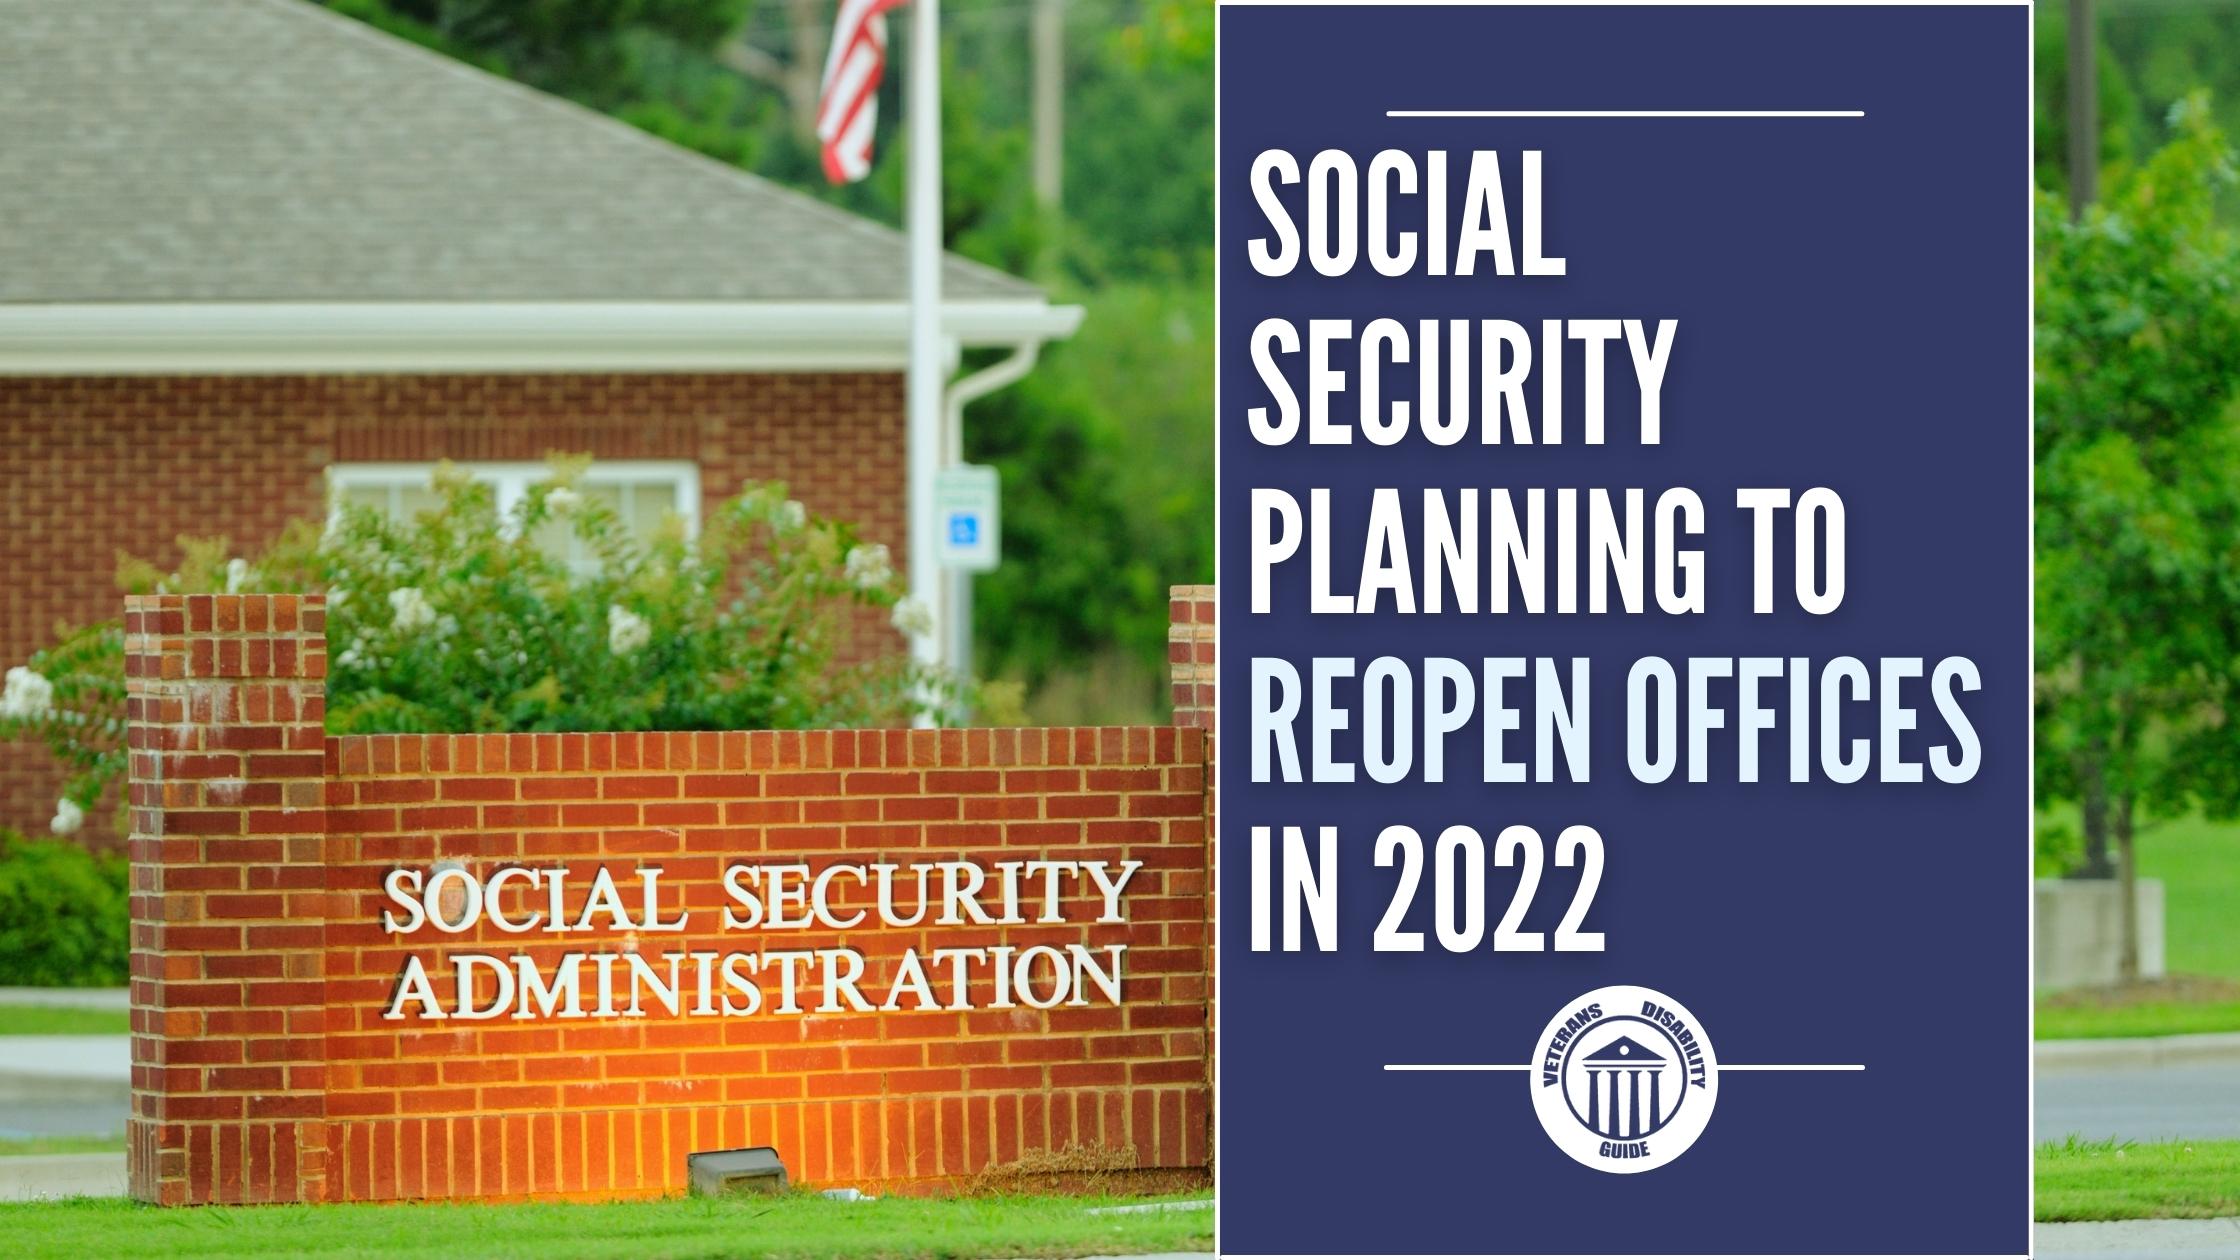 Social Security Planning to Reopen Offices in 2022 blog header image